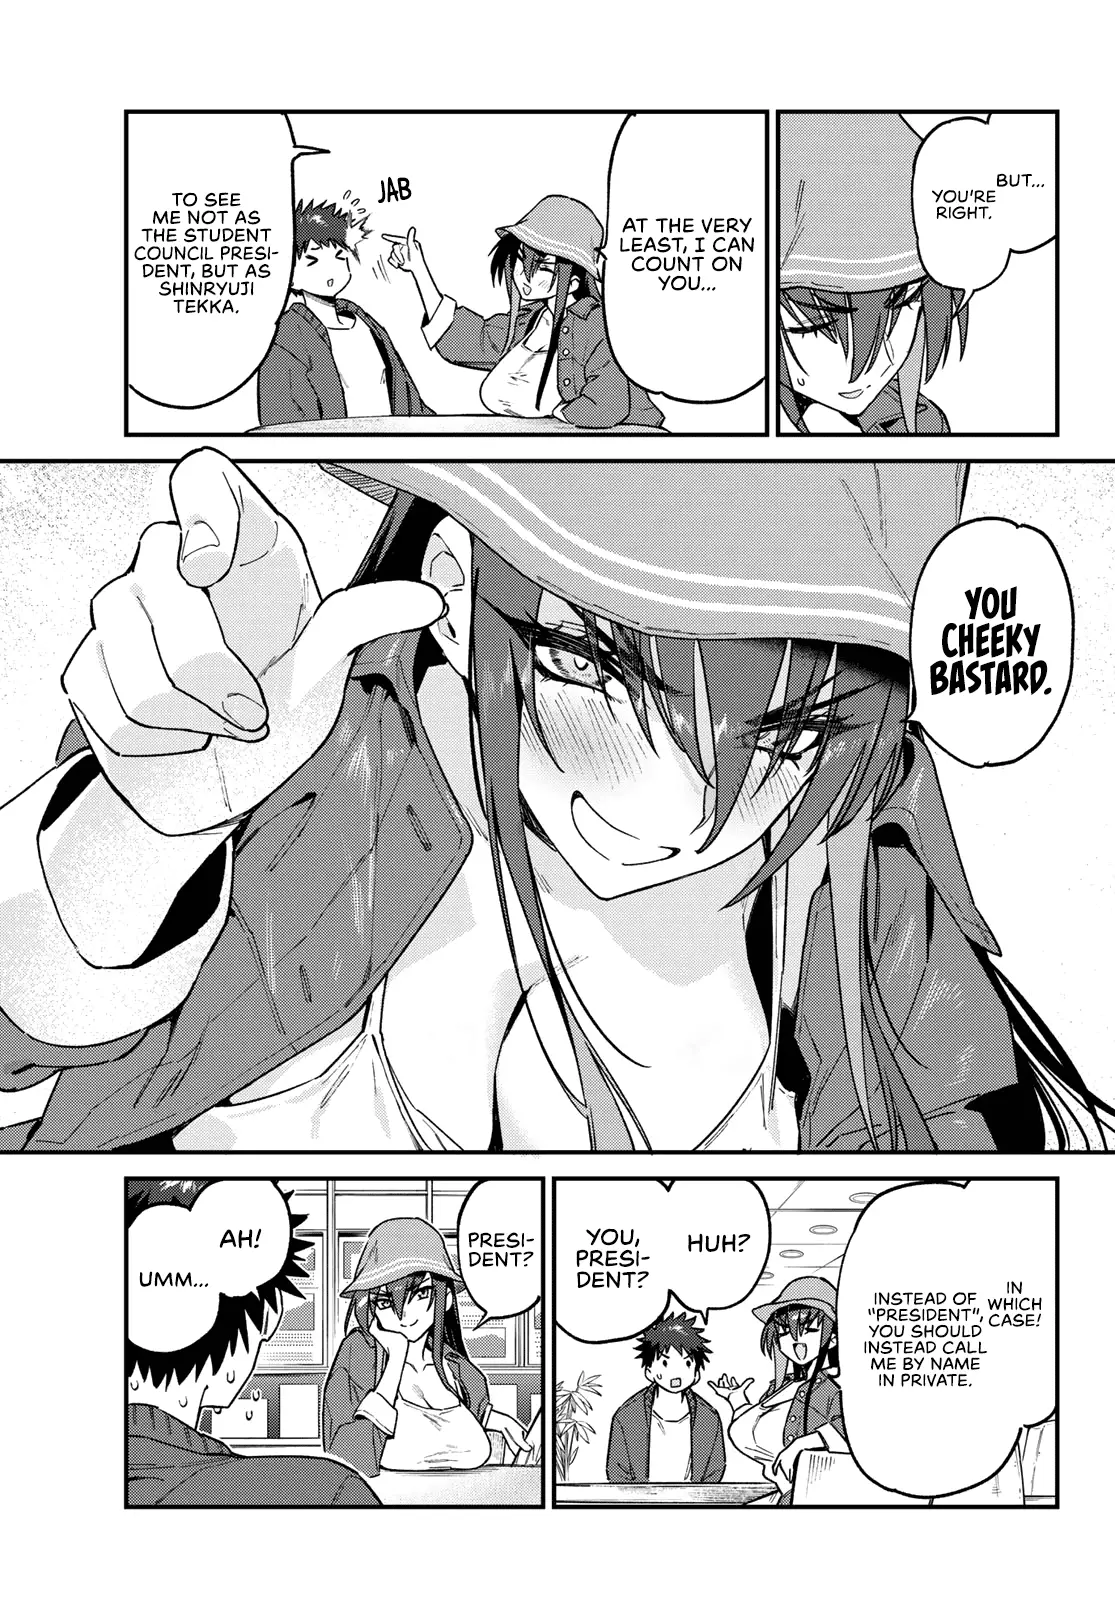 Kanan-Sama Is Easy As Hell! - 88 page 8-76450198